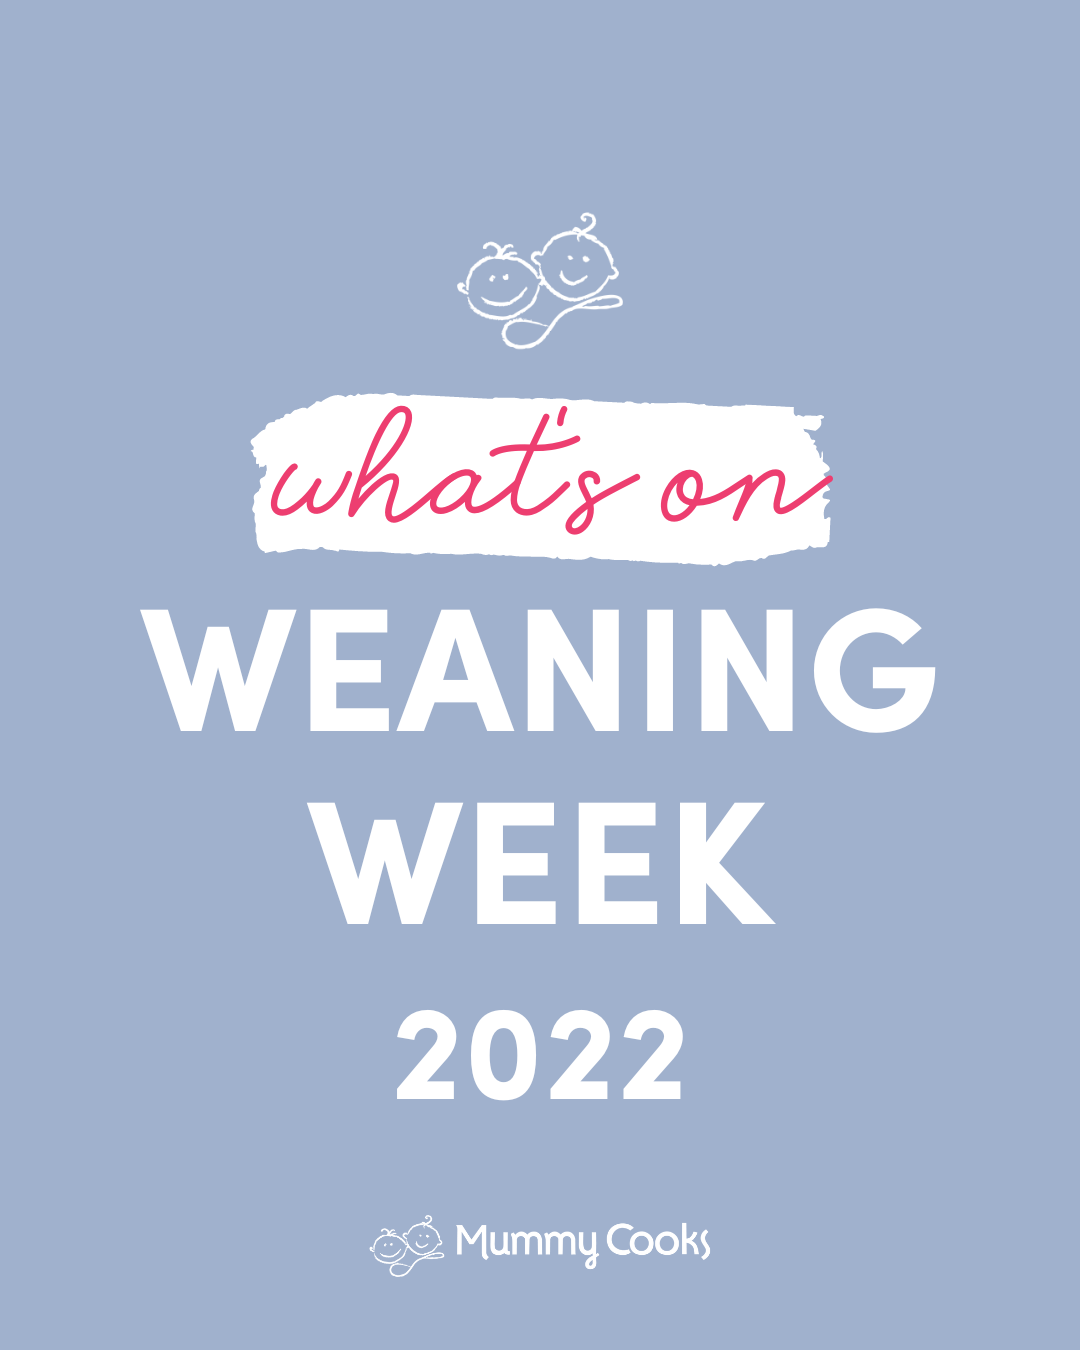 What's On - Weaning Week Ireland 2022